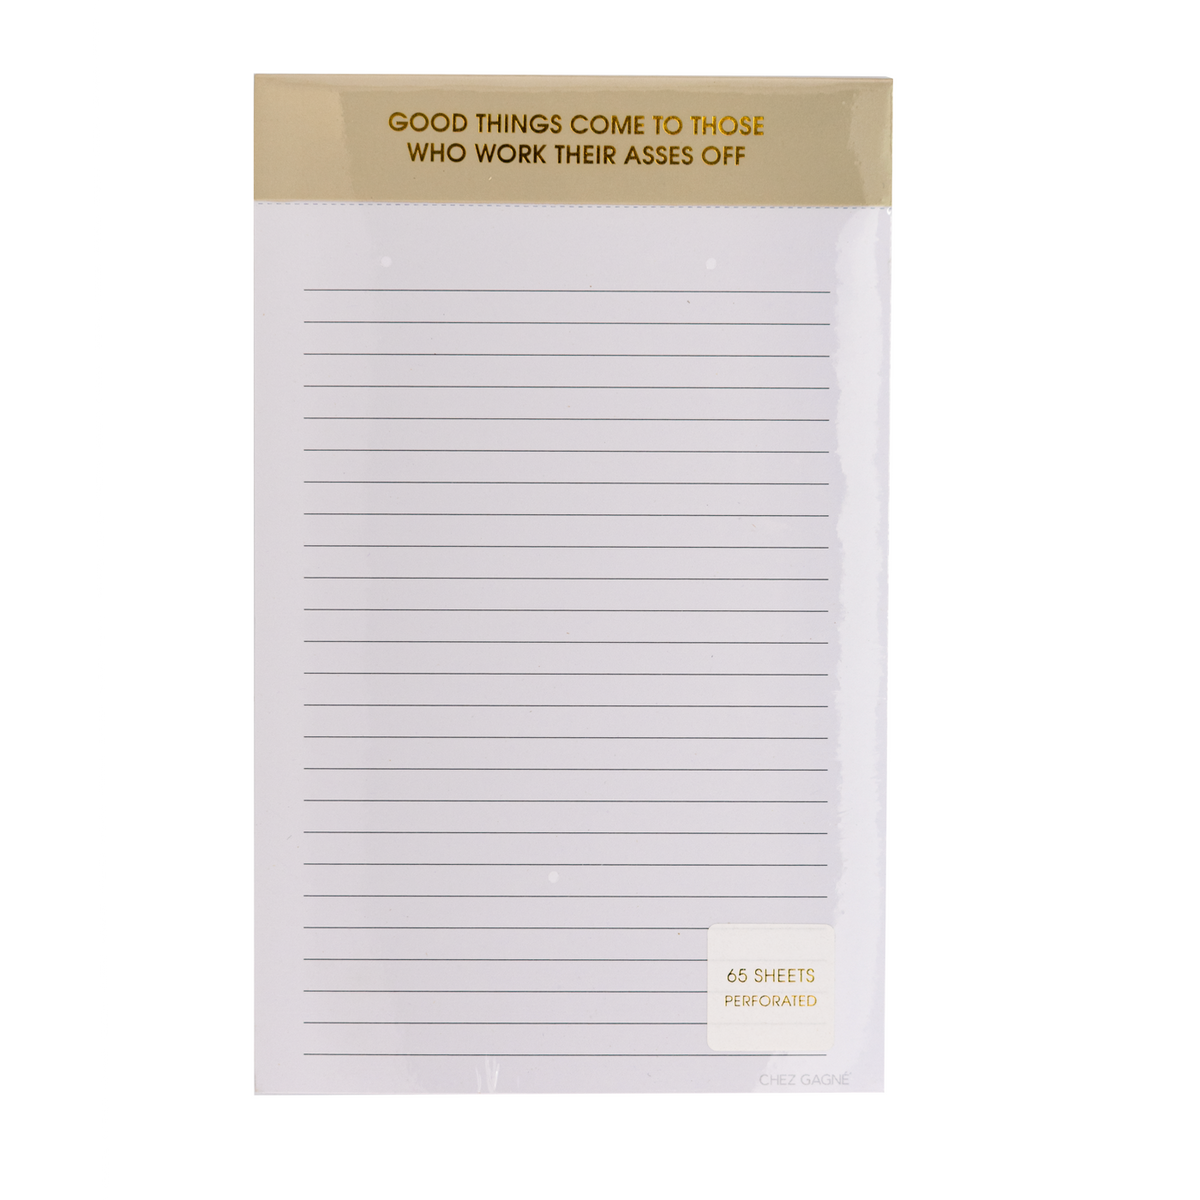 CHEZ GAGNE - Notepad - Good Things Come To Those Who Work Their #$!@ Off